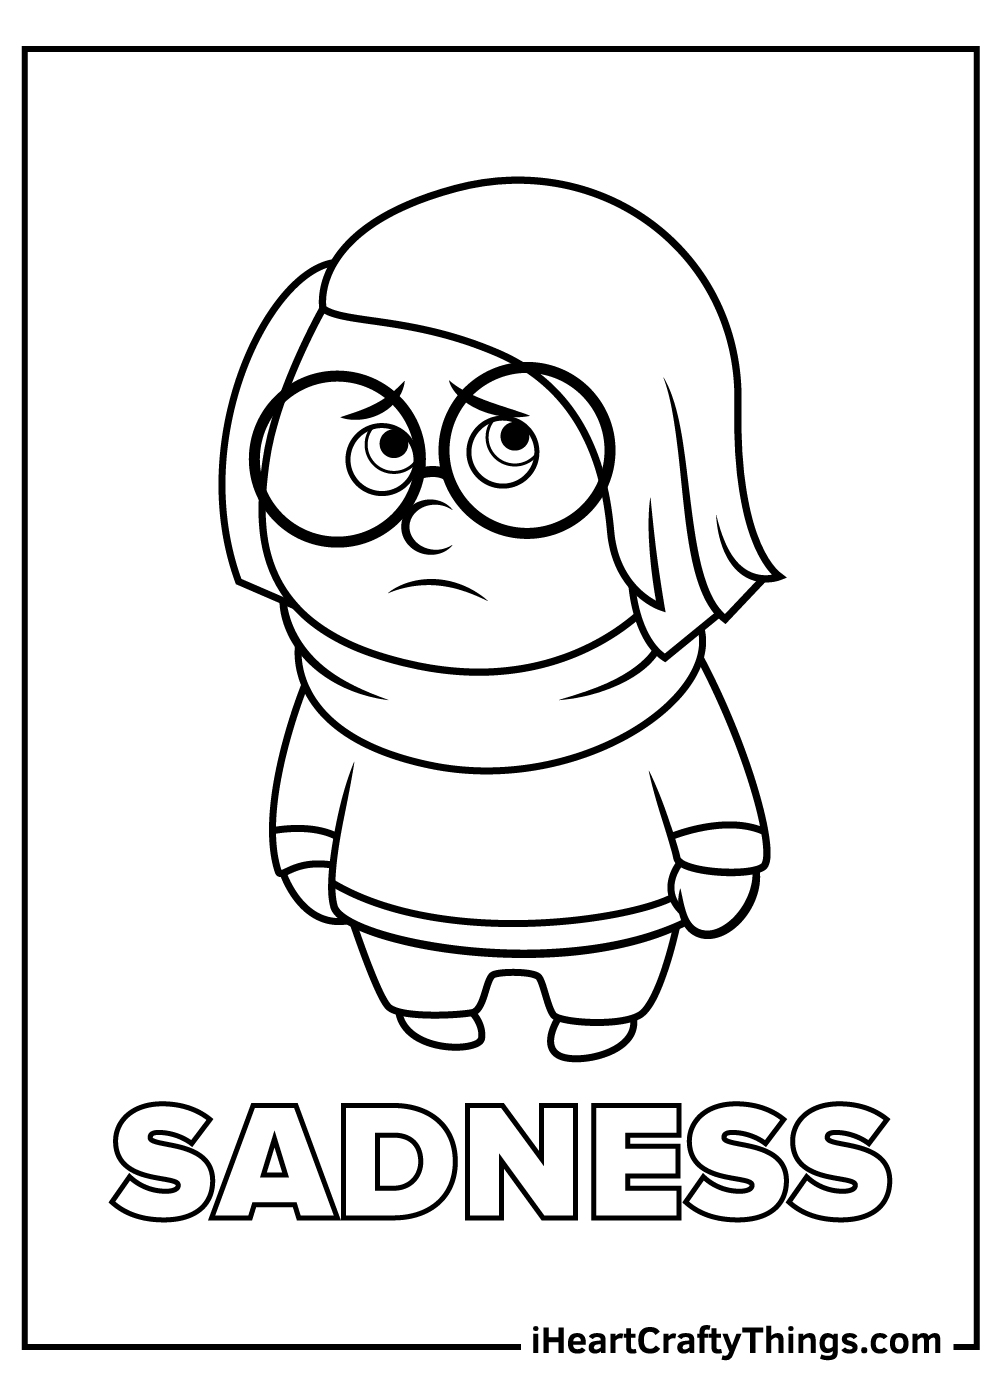 Inside Out Coloring Pages Updated 20